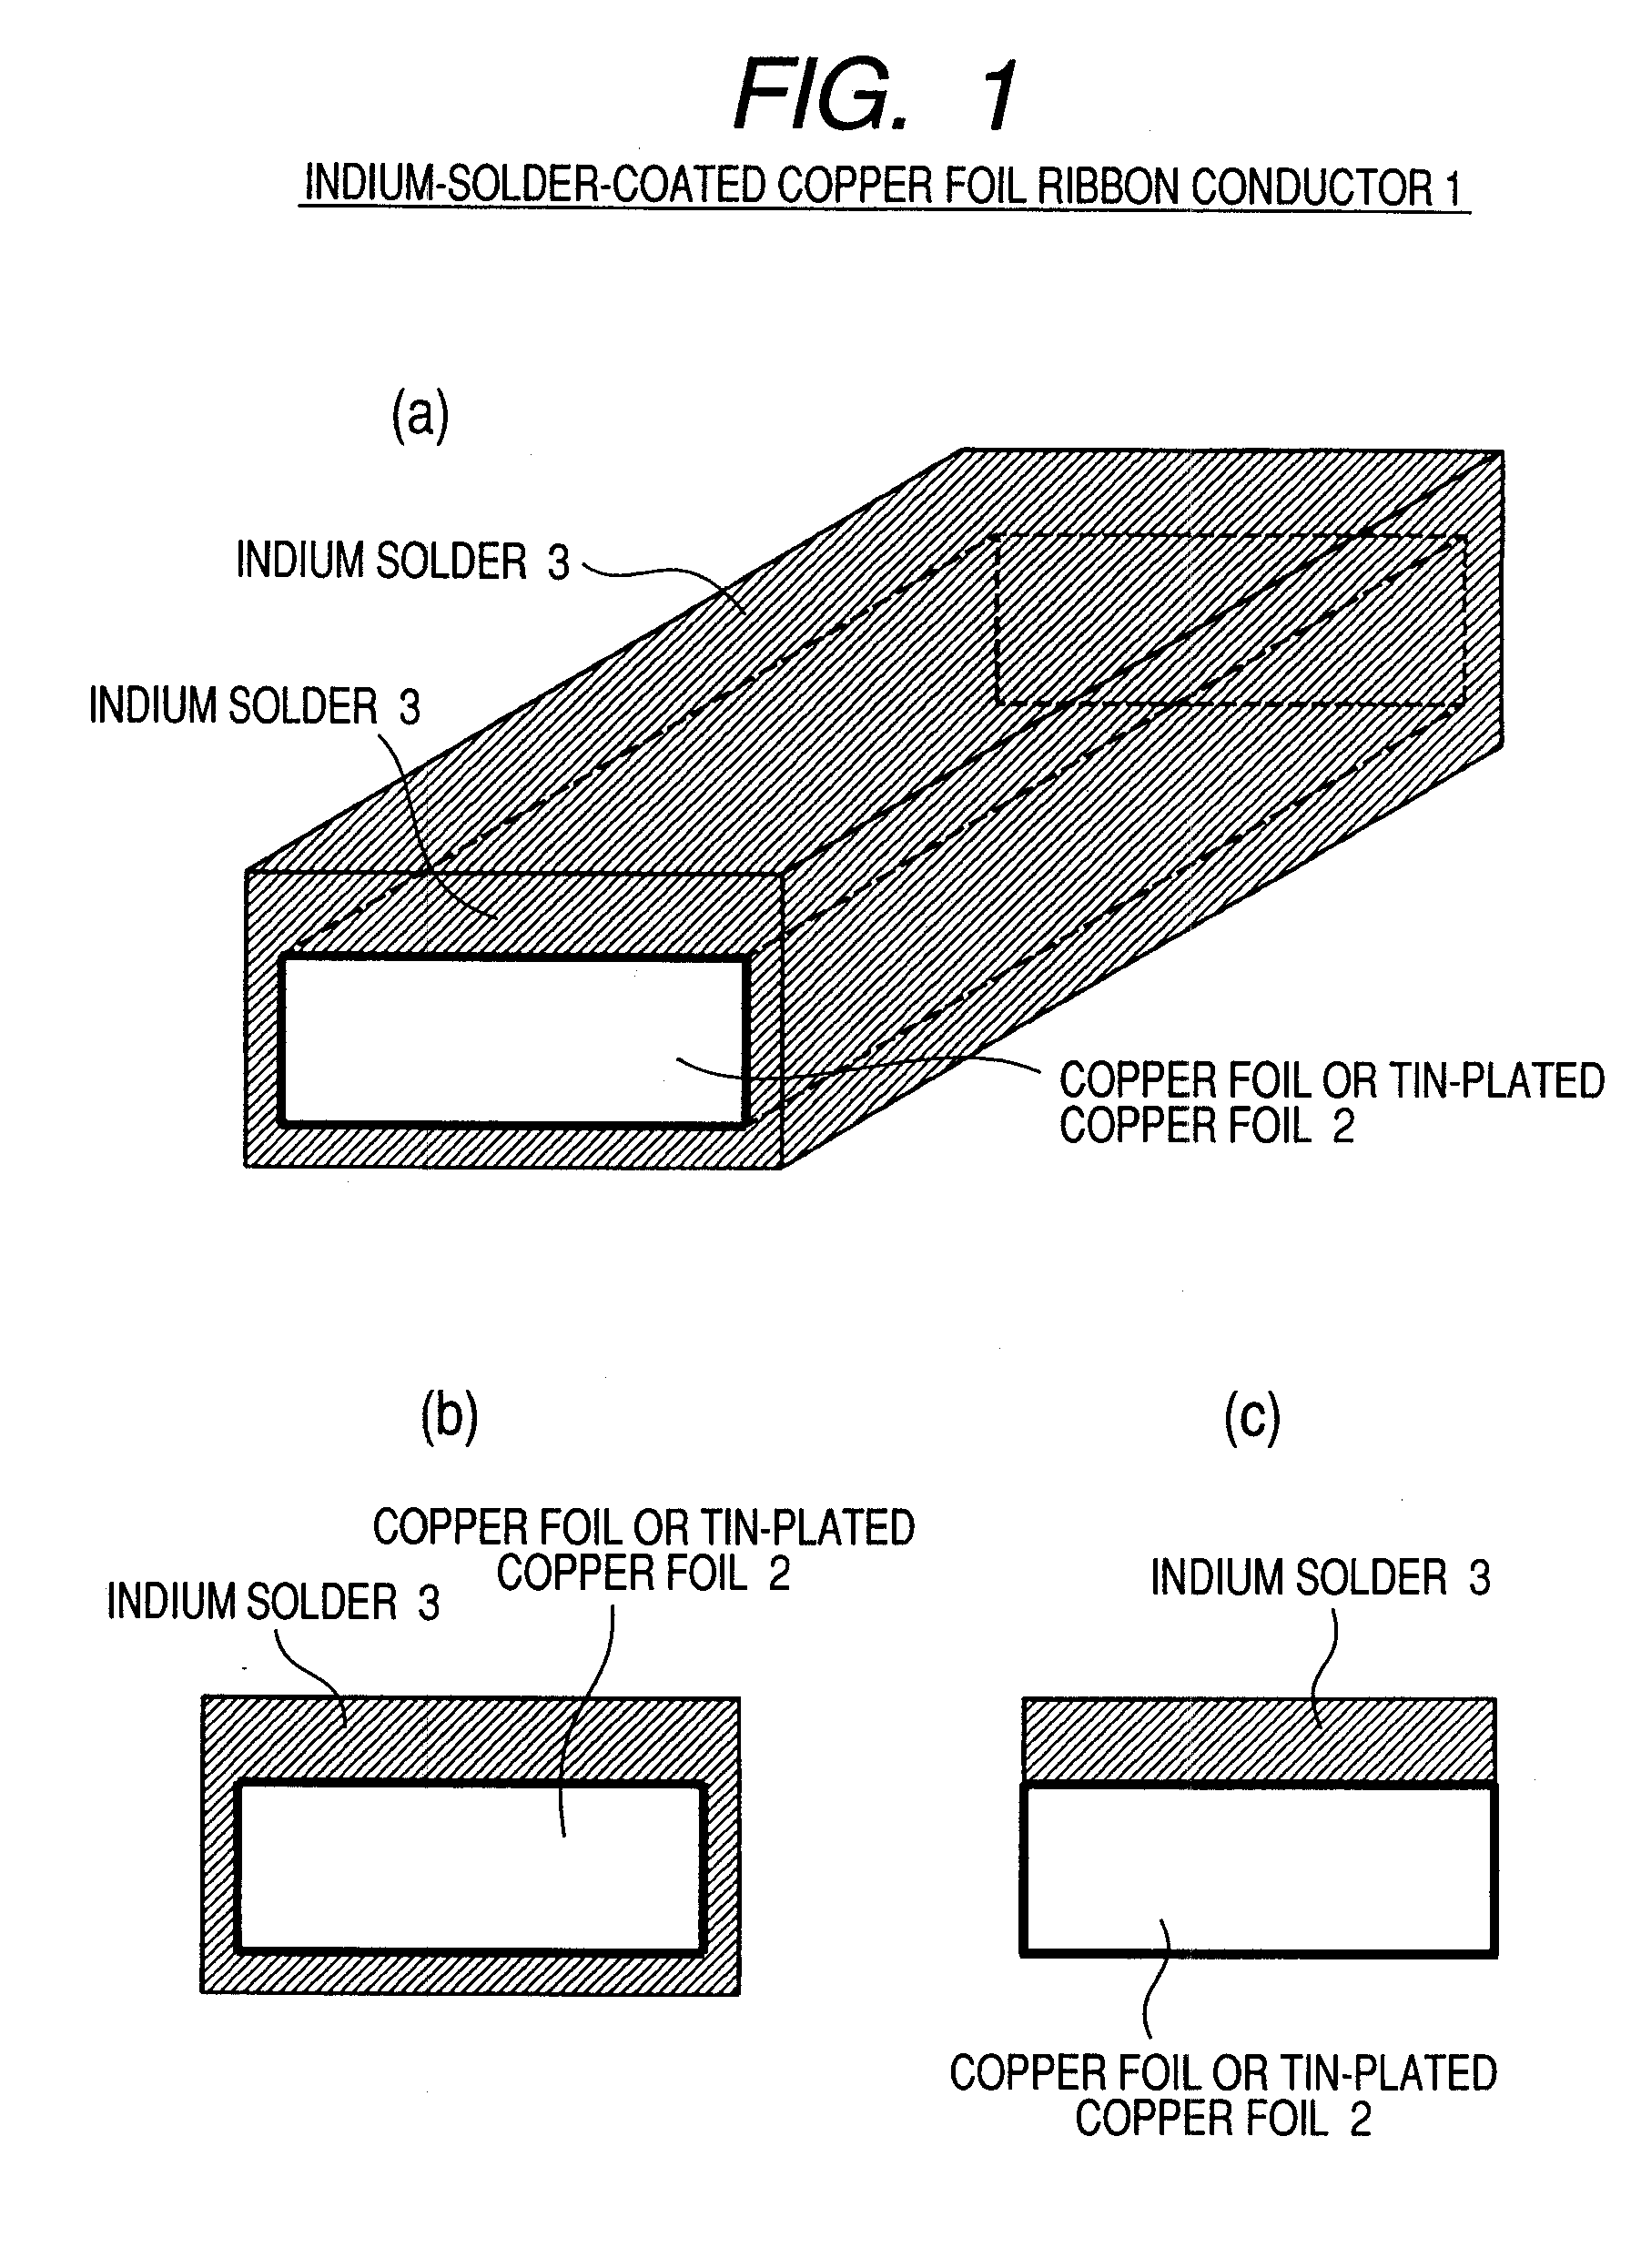 Indium-solder-coated copper foil ribbon conductor and method of connecting the same